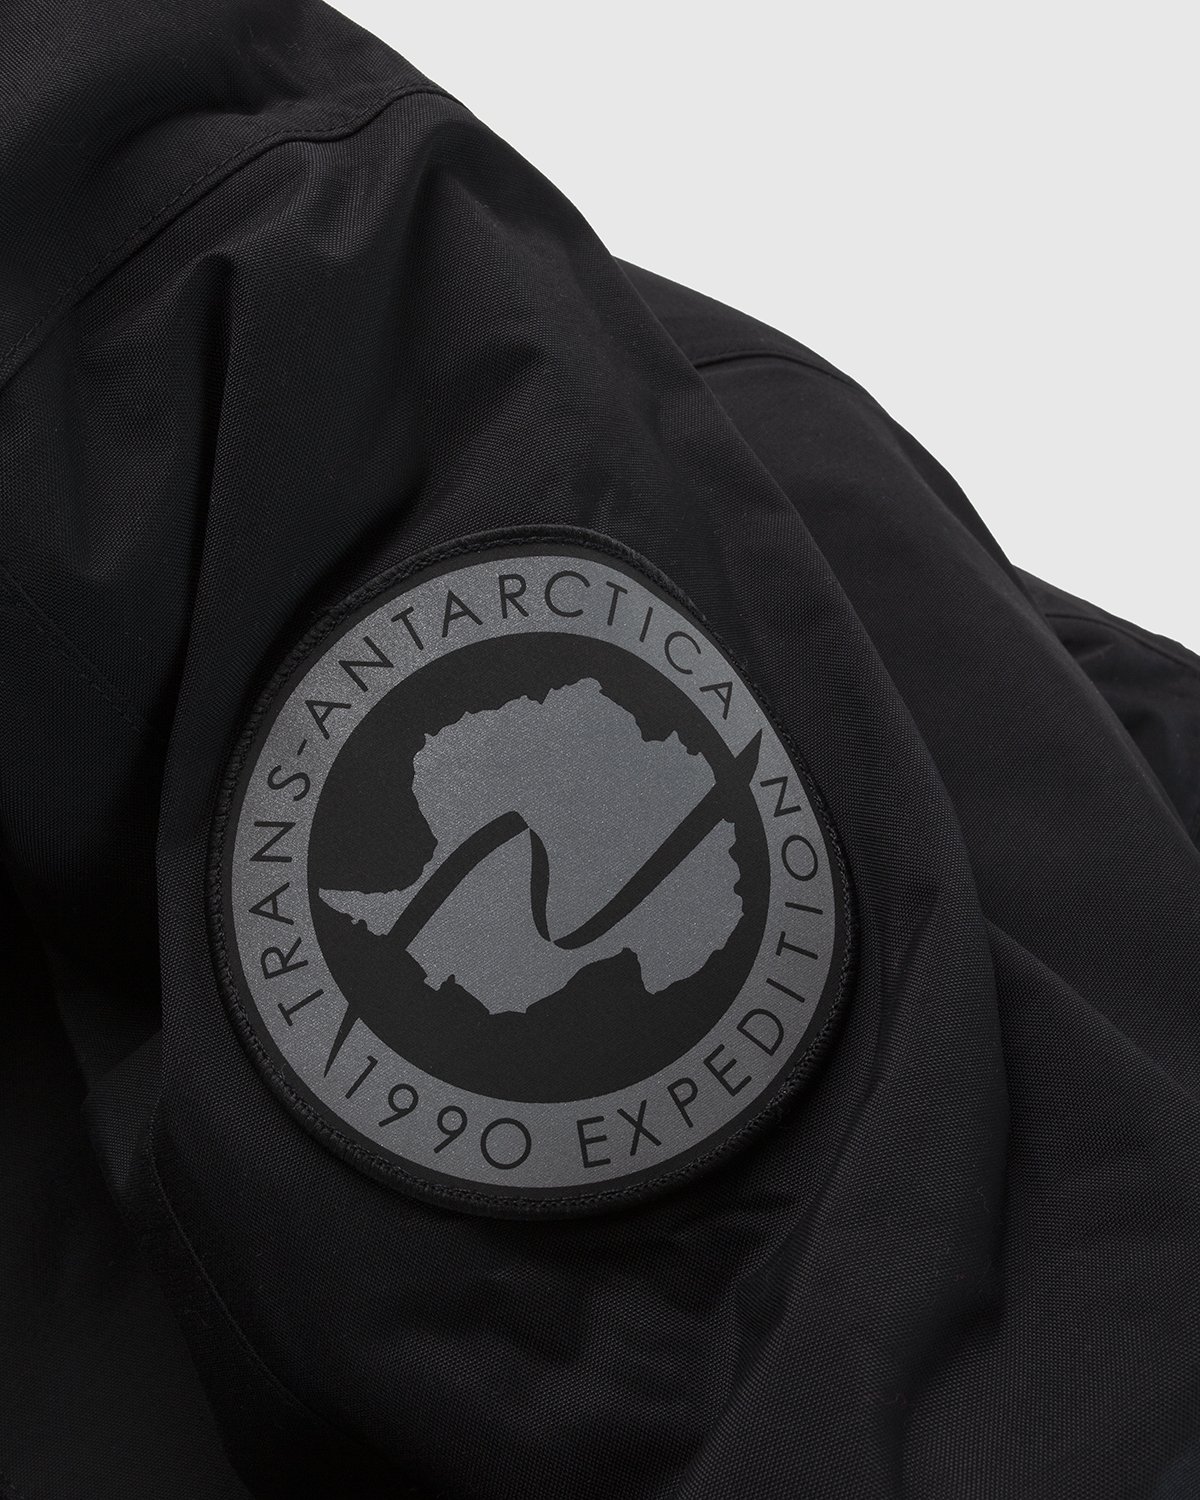 The North Face - Trans Antarctica Expedition Parka Black - Clothing - Black - Image 6